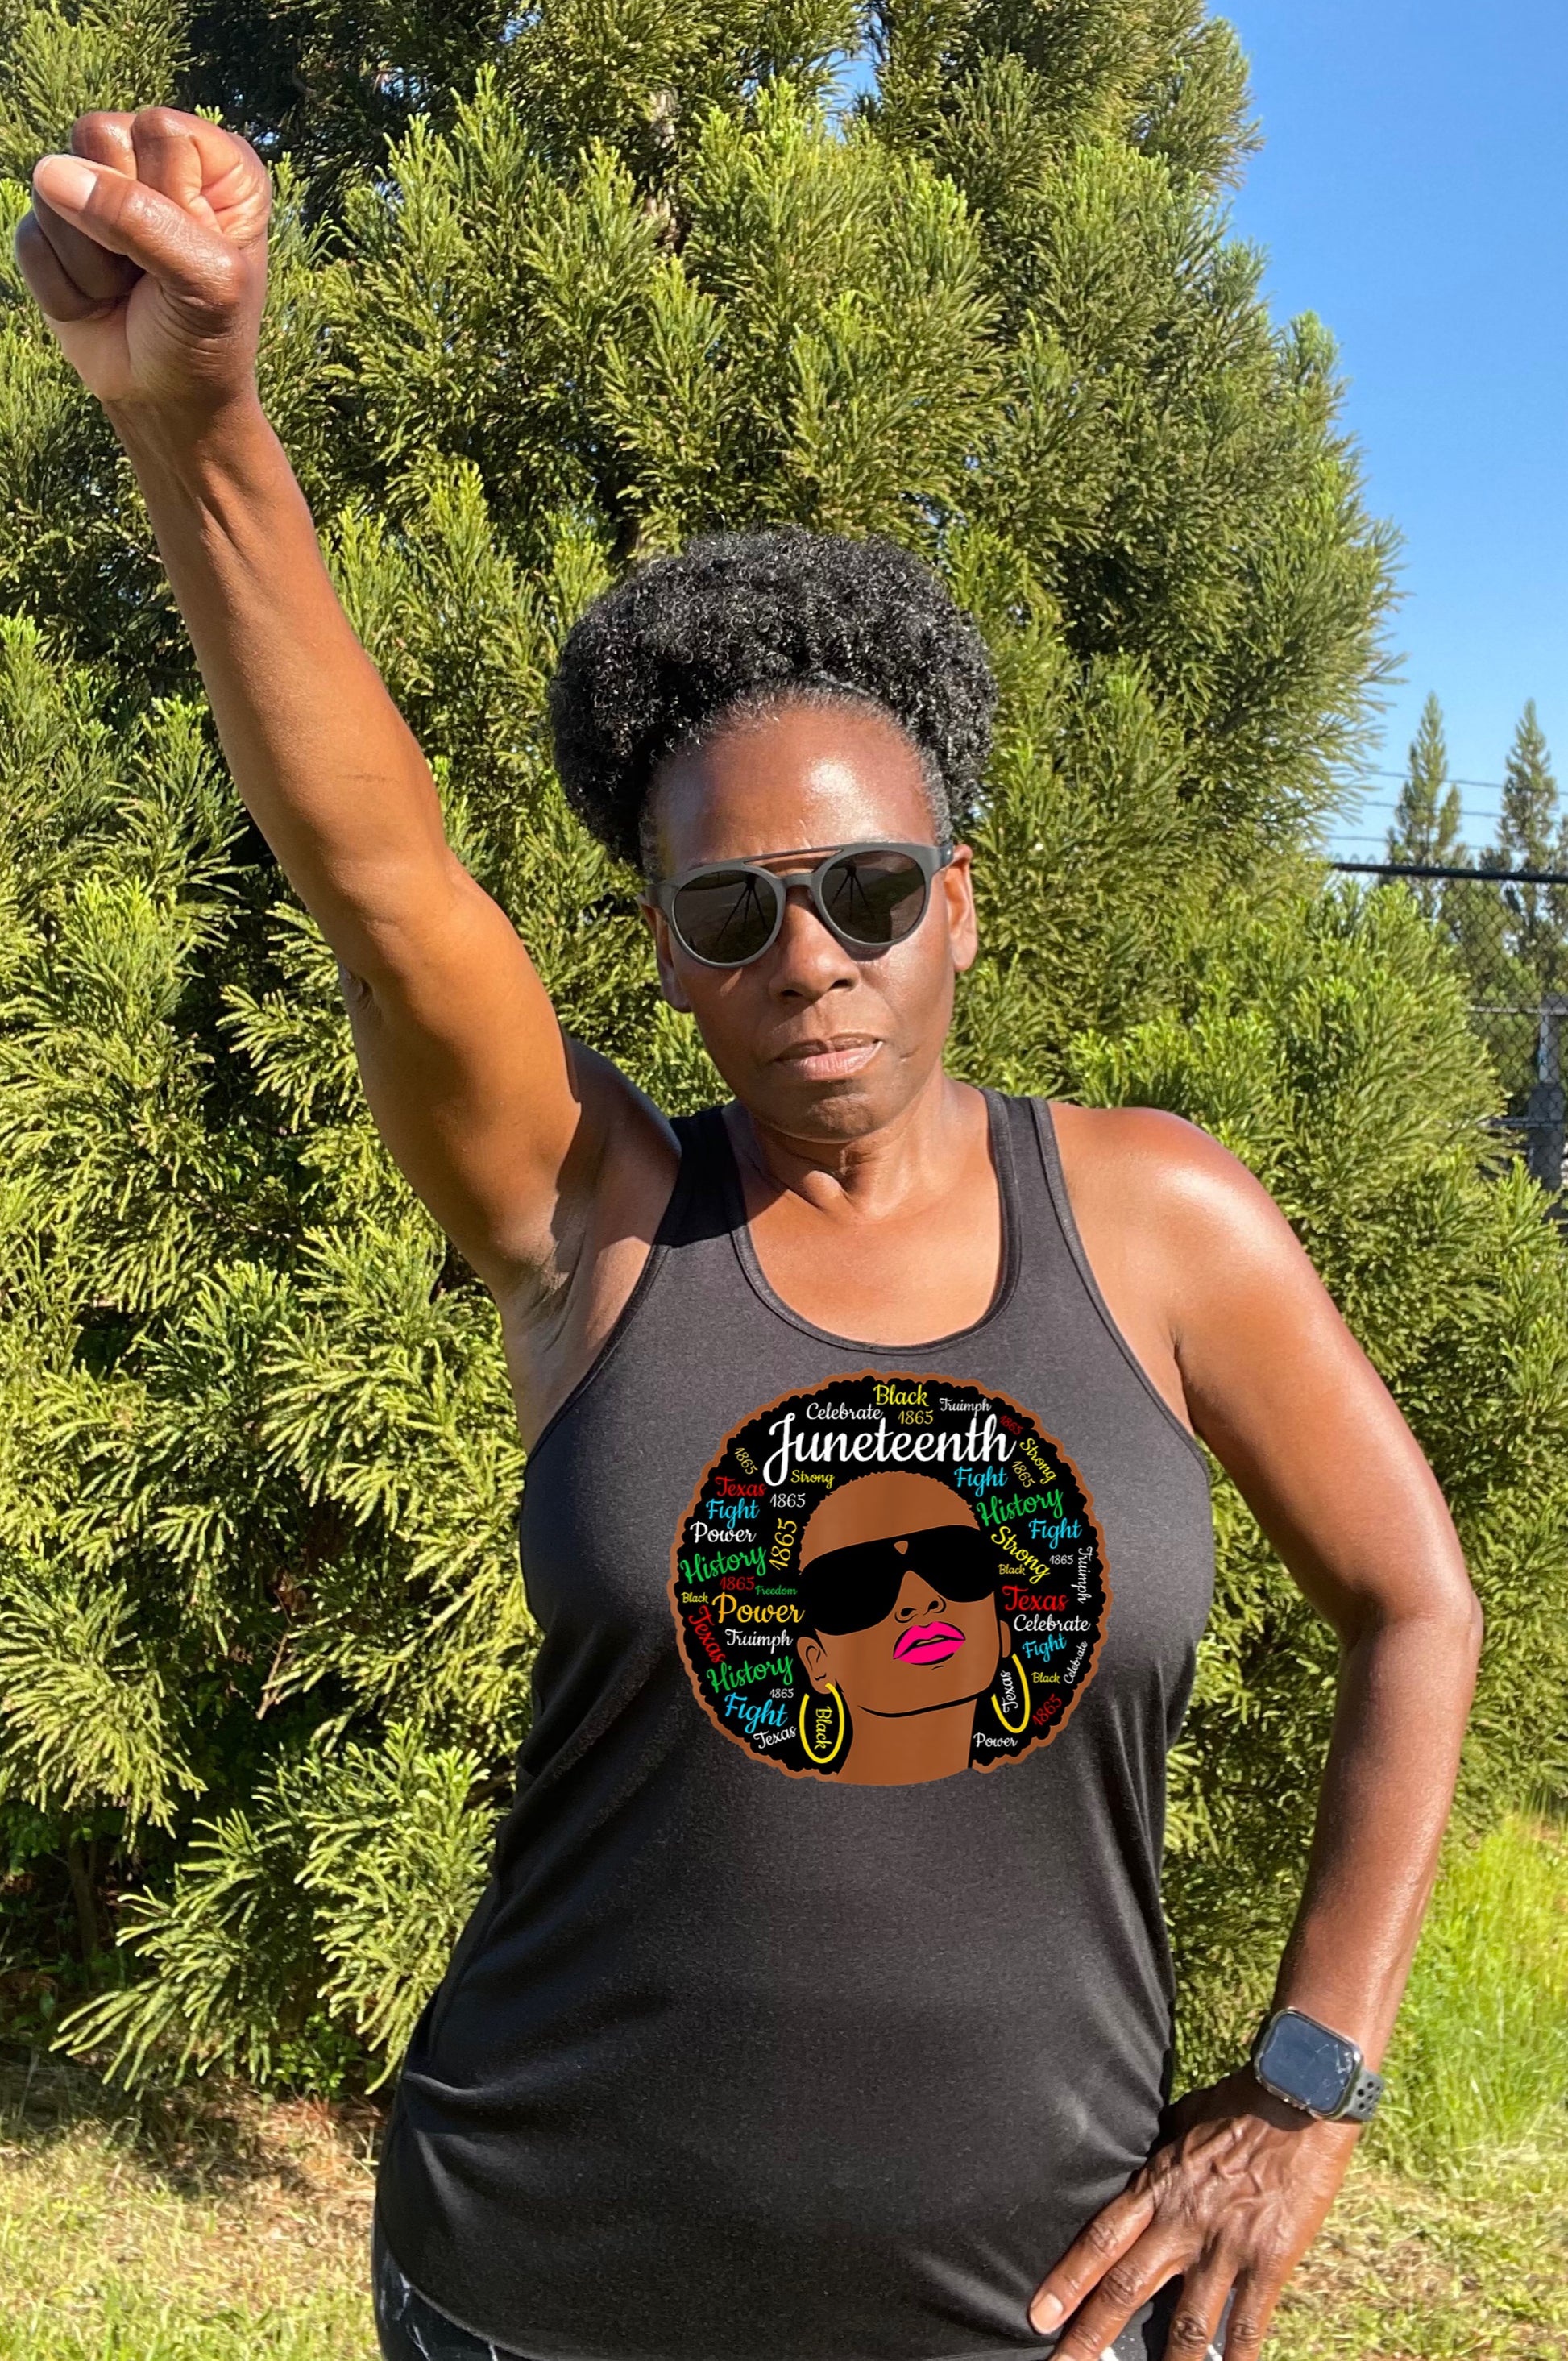 Black Juneteenth tank top for working out with Afro girl